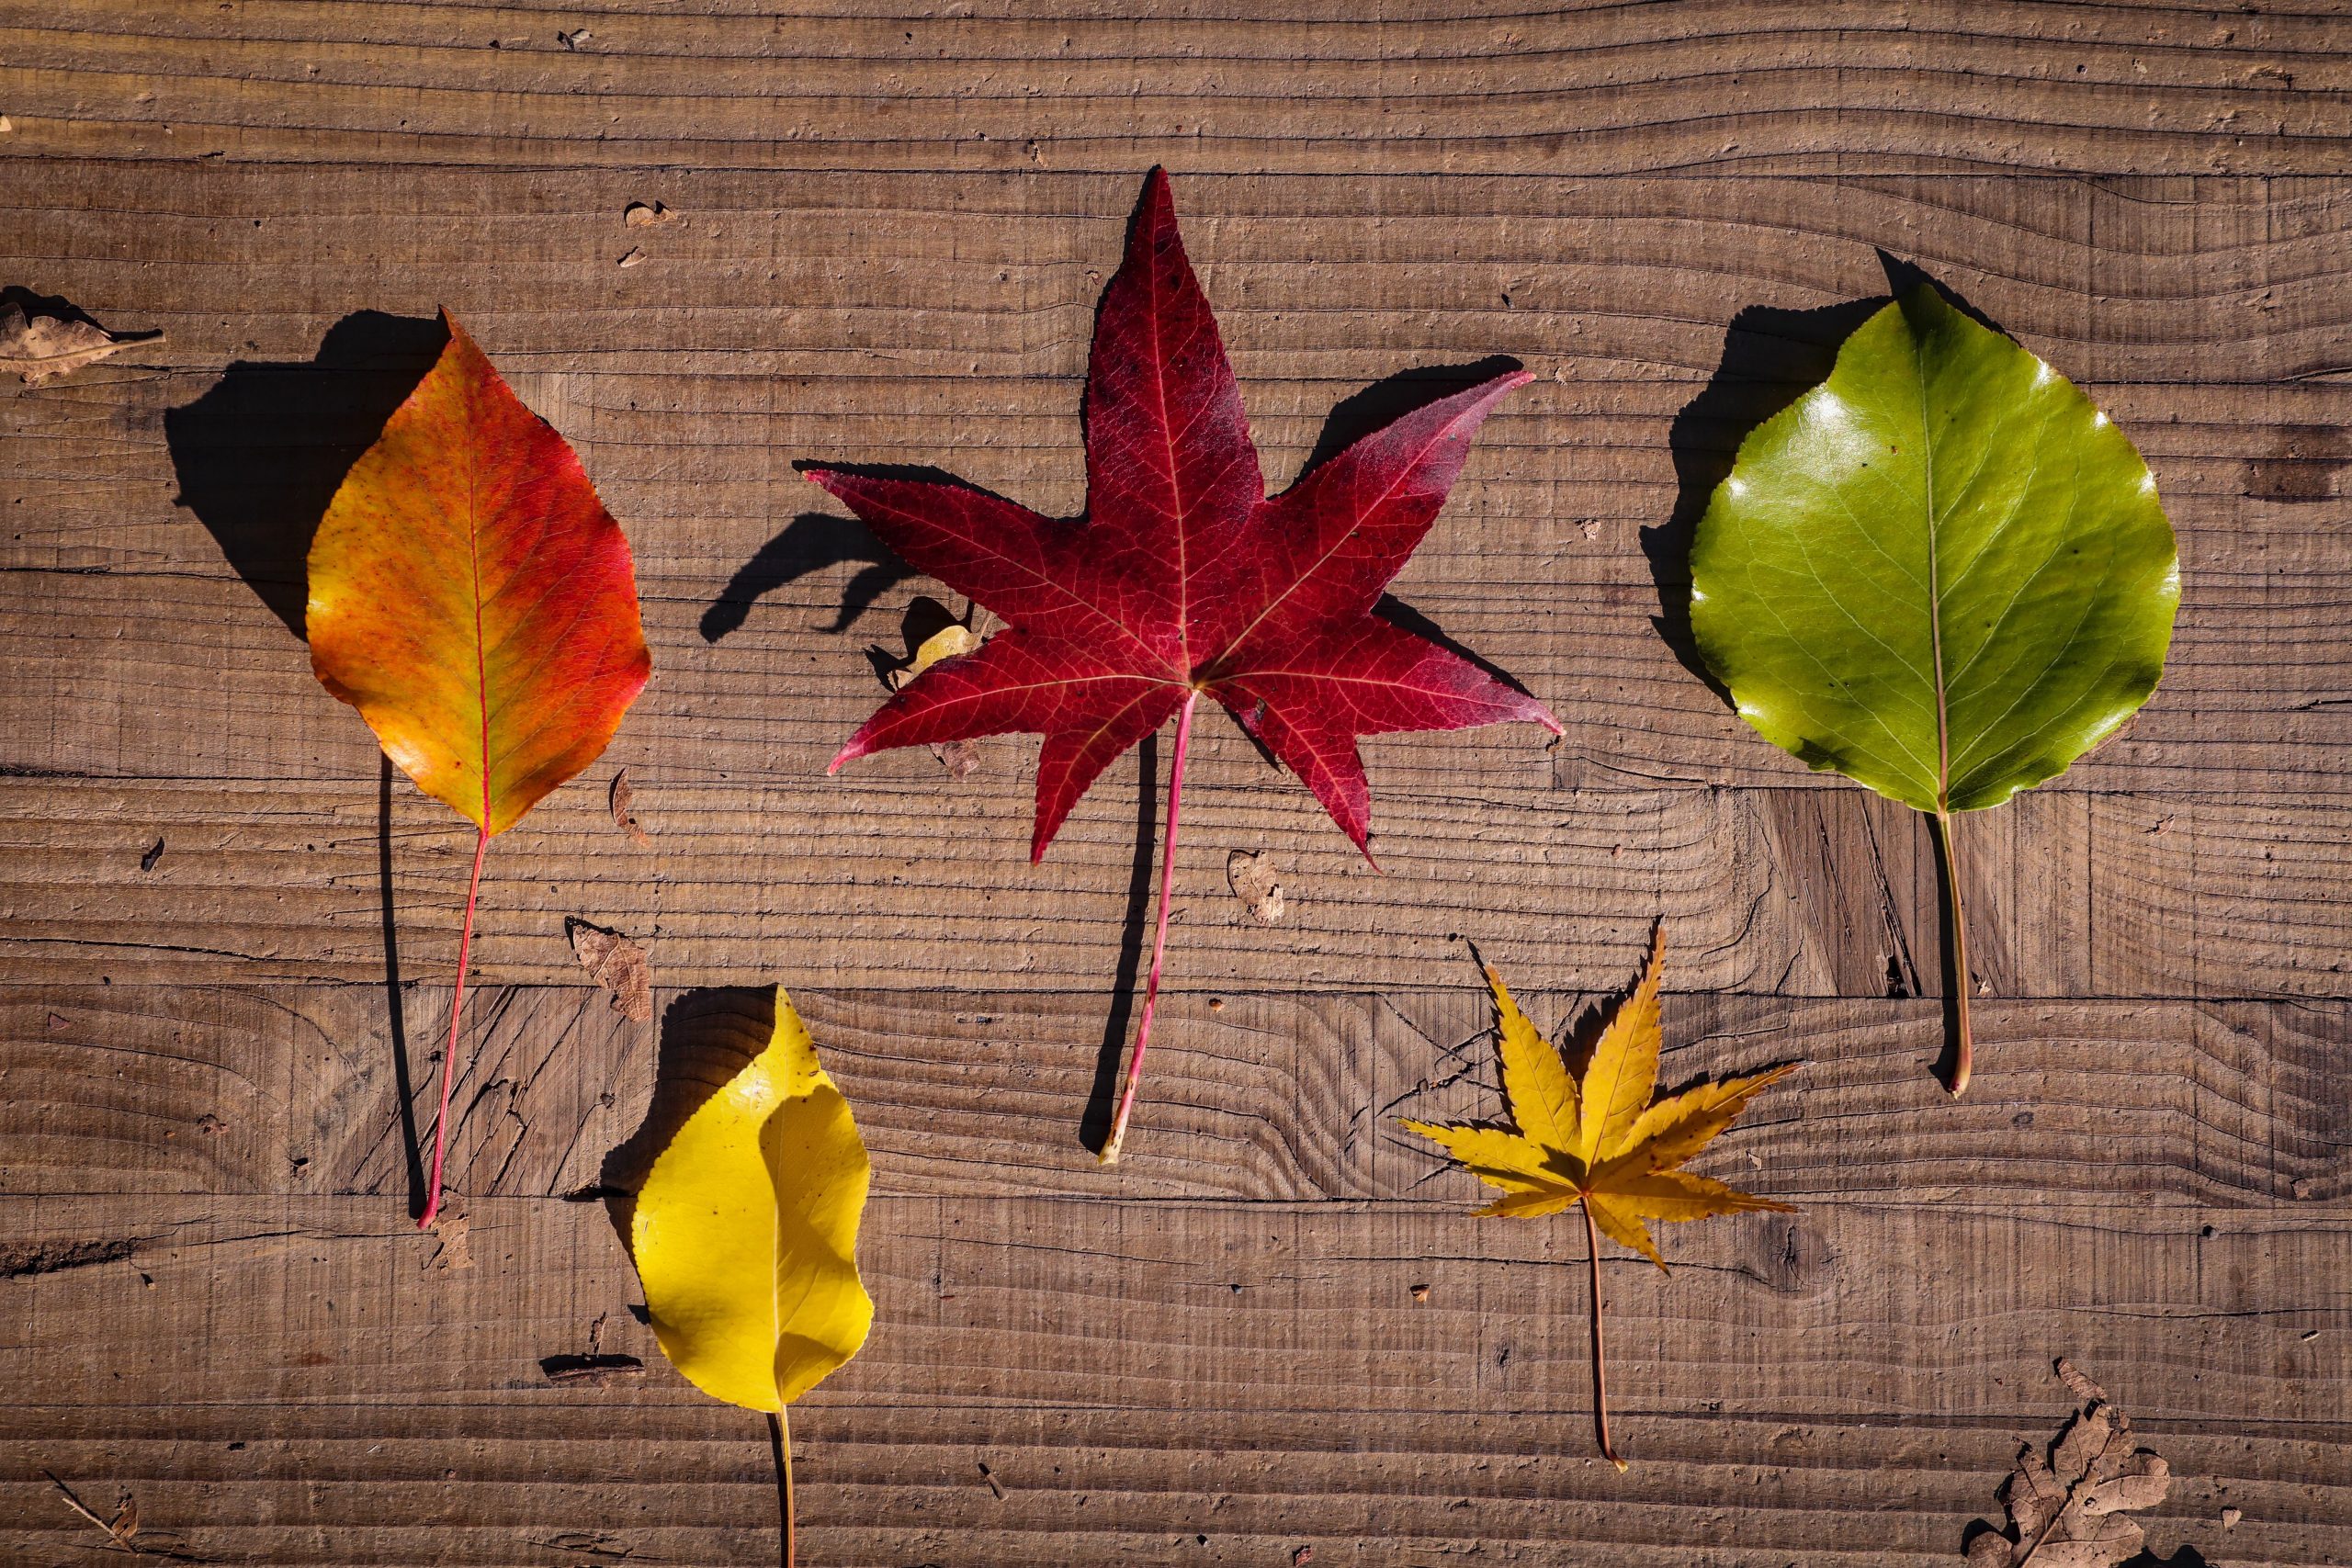 A group of leaves on a wooden surface in New Braunfels, Texas.